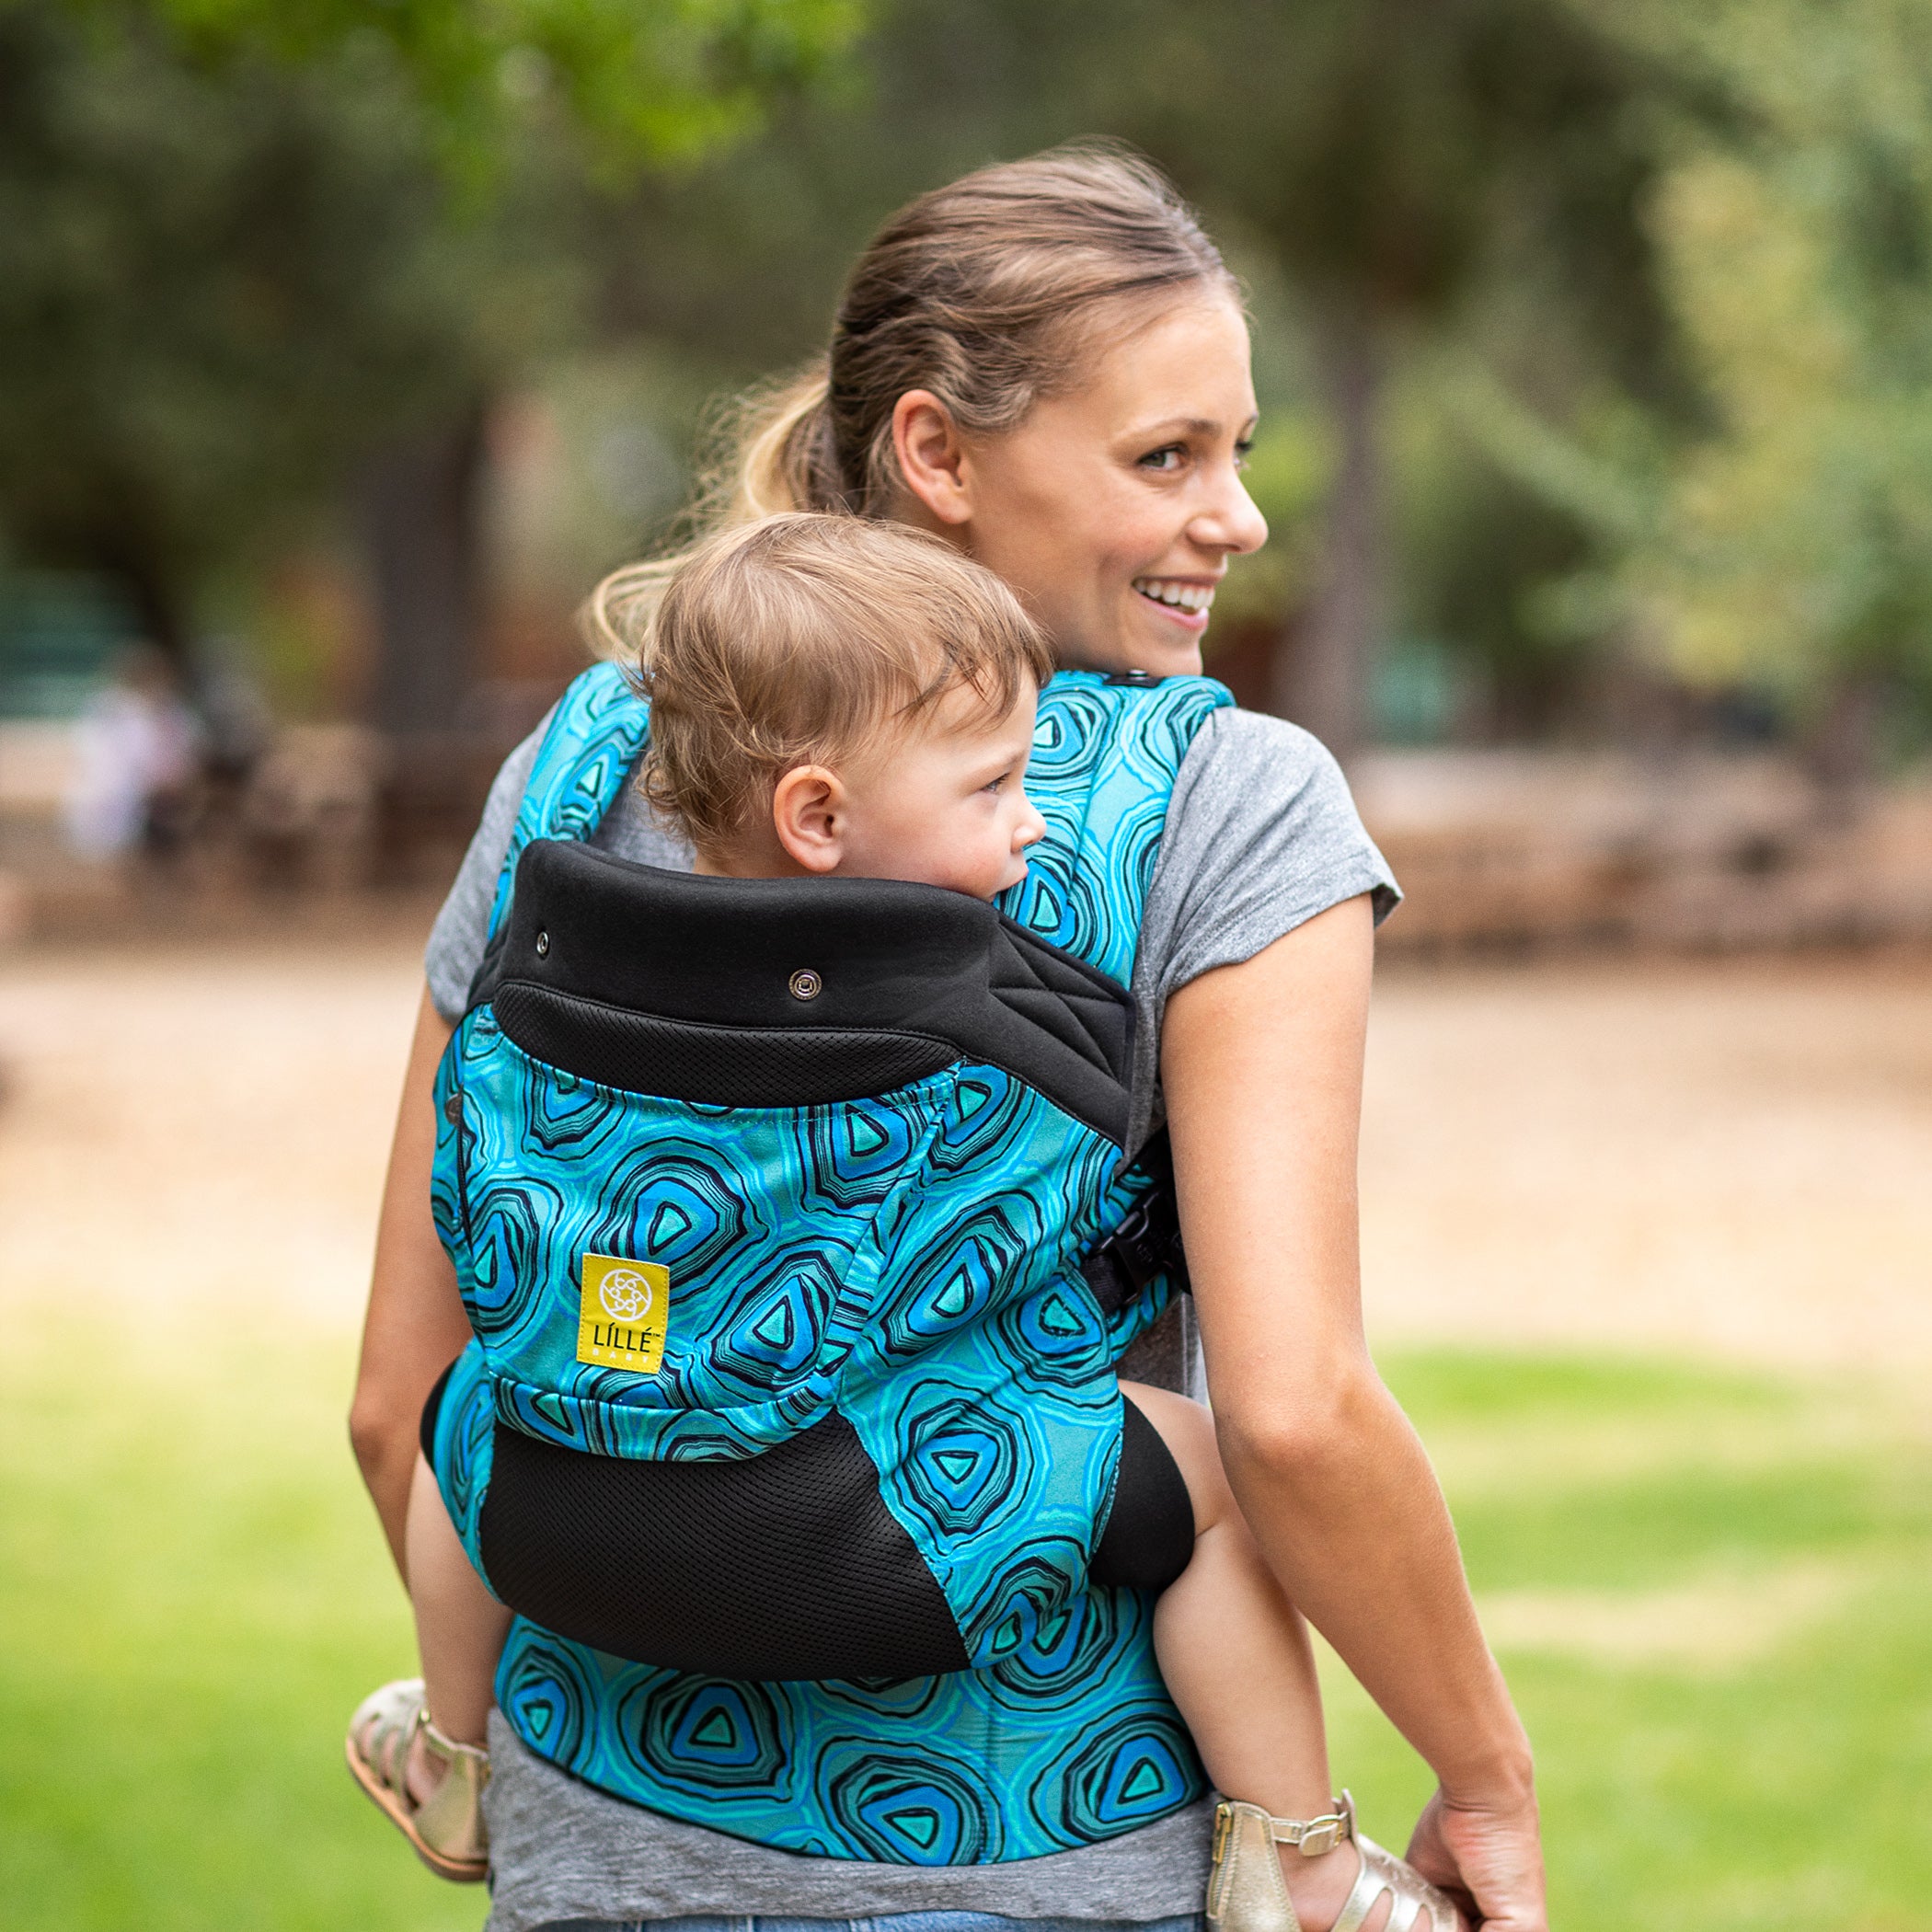 mom wearing baby in lillebaby carryon baby carrier in blue agate